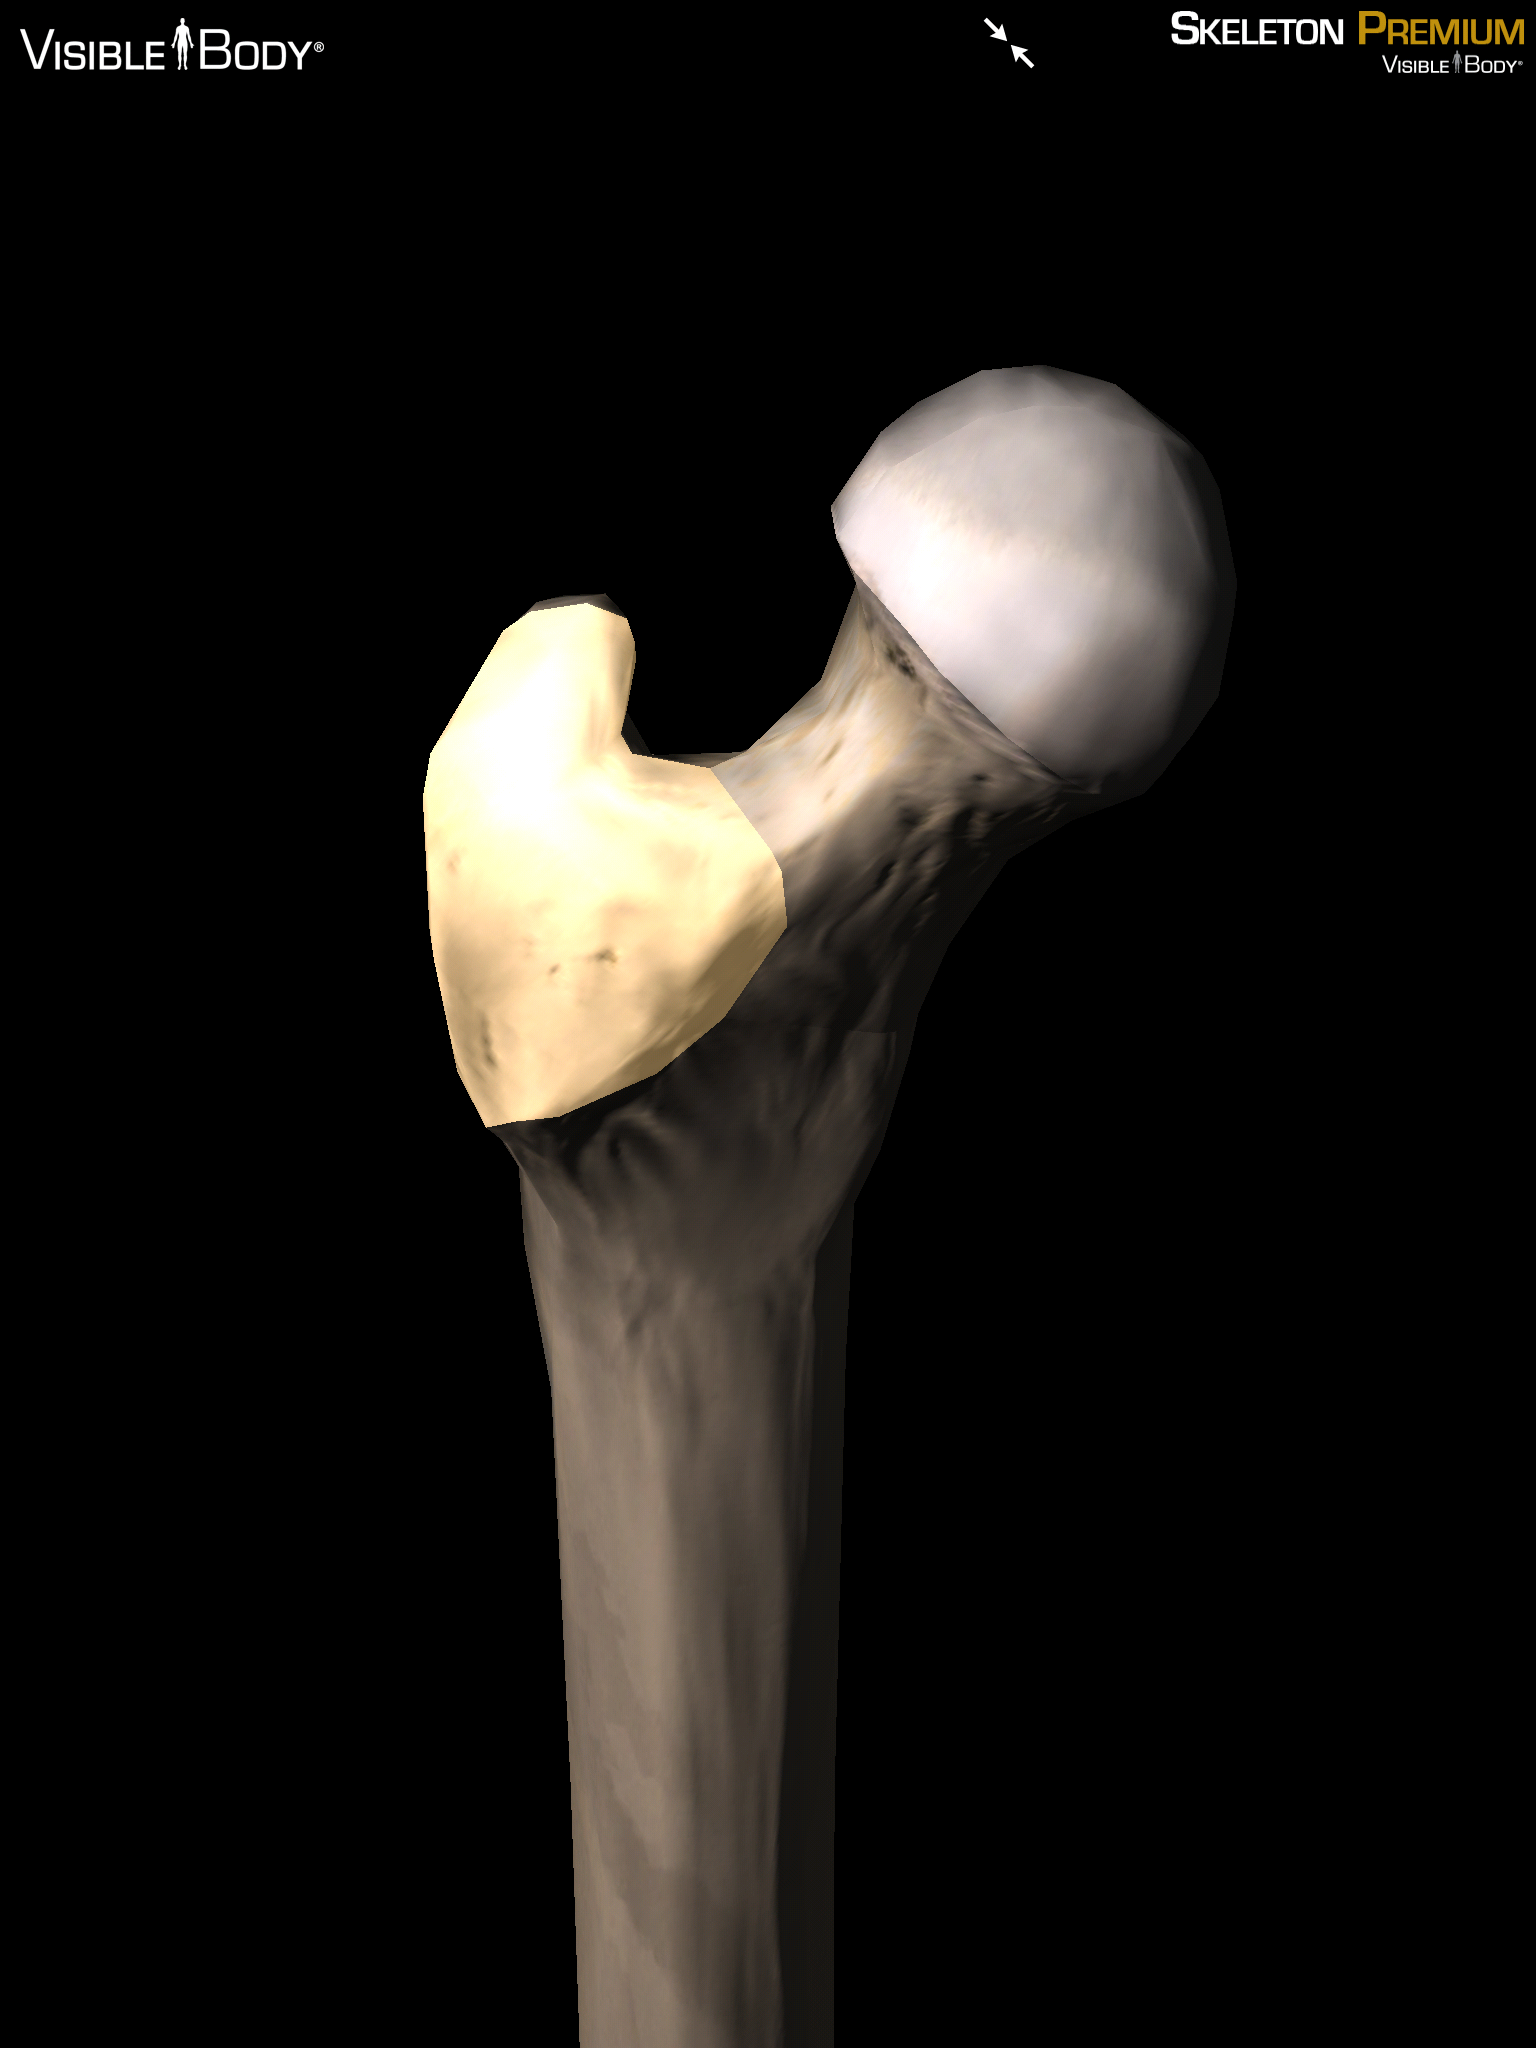 3D Skeletal System: 5 Cool Facts about the Femur